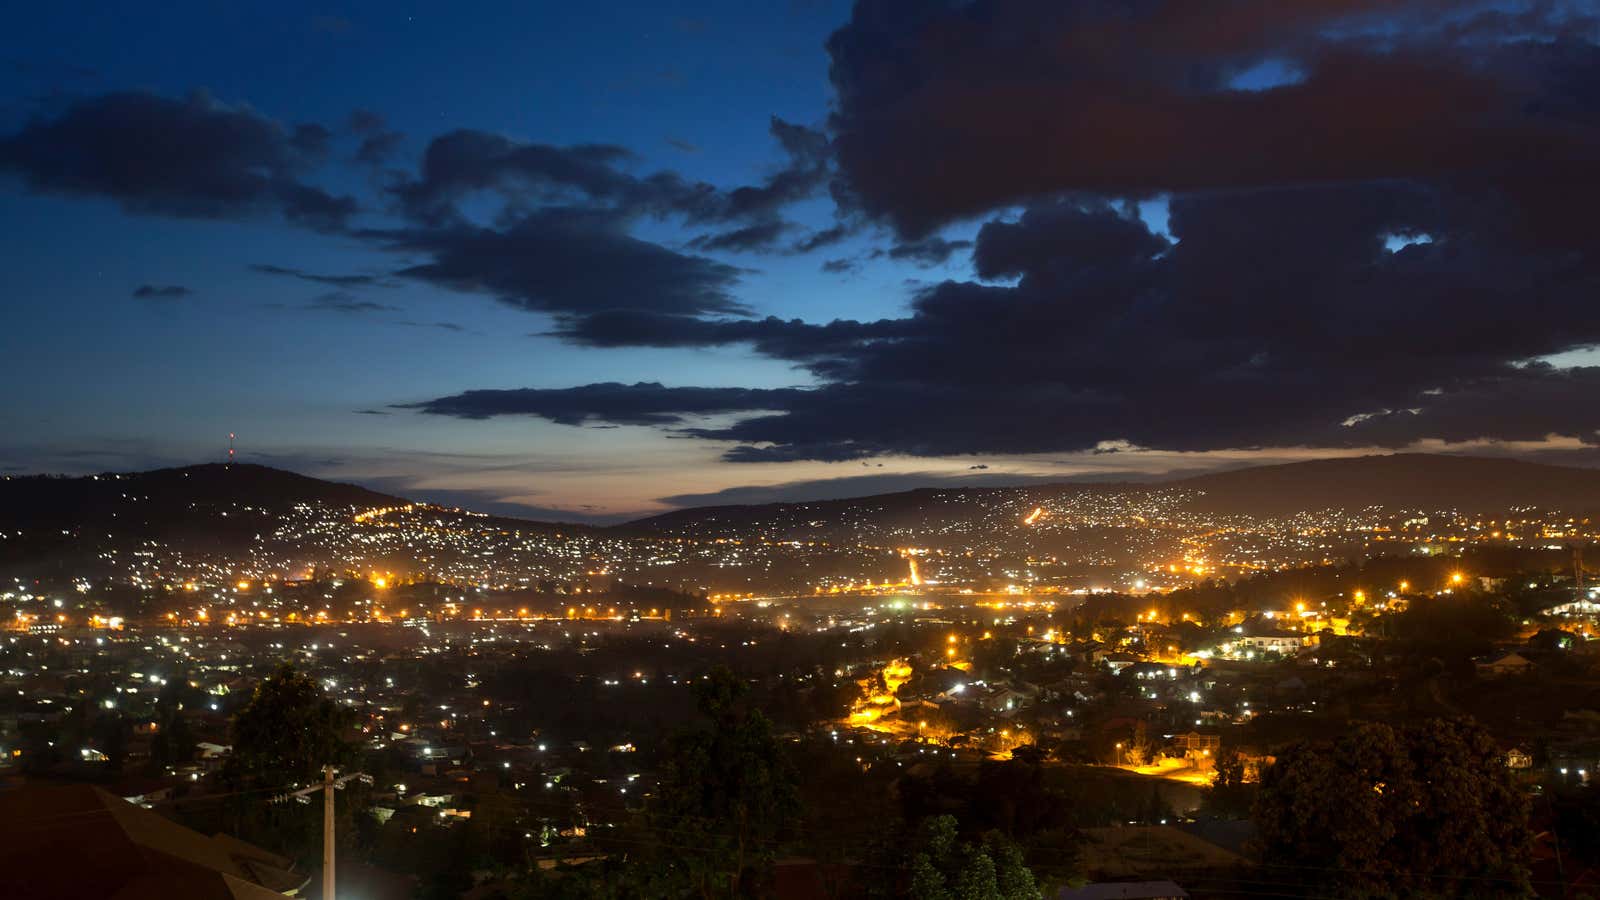 A view over the city at night in the capital Kigali, Rwanda